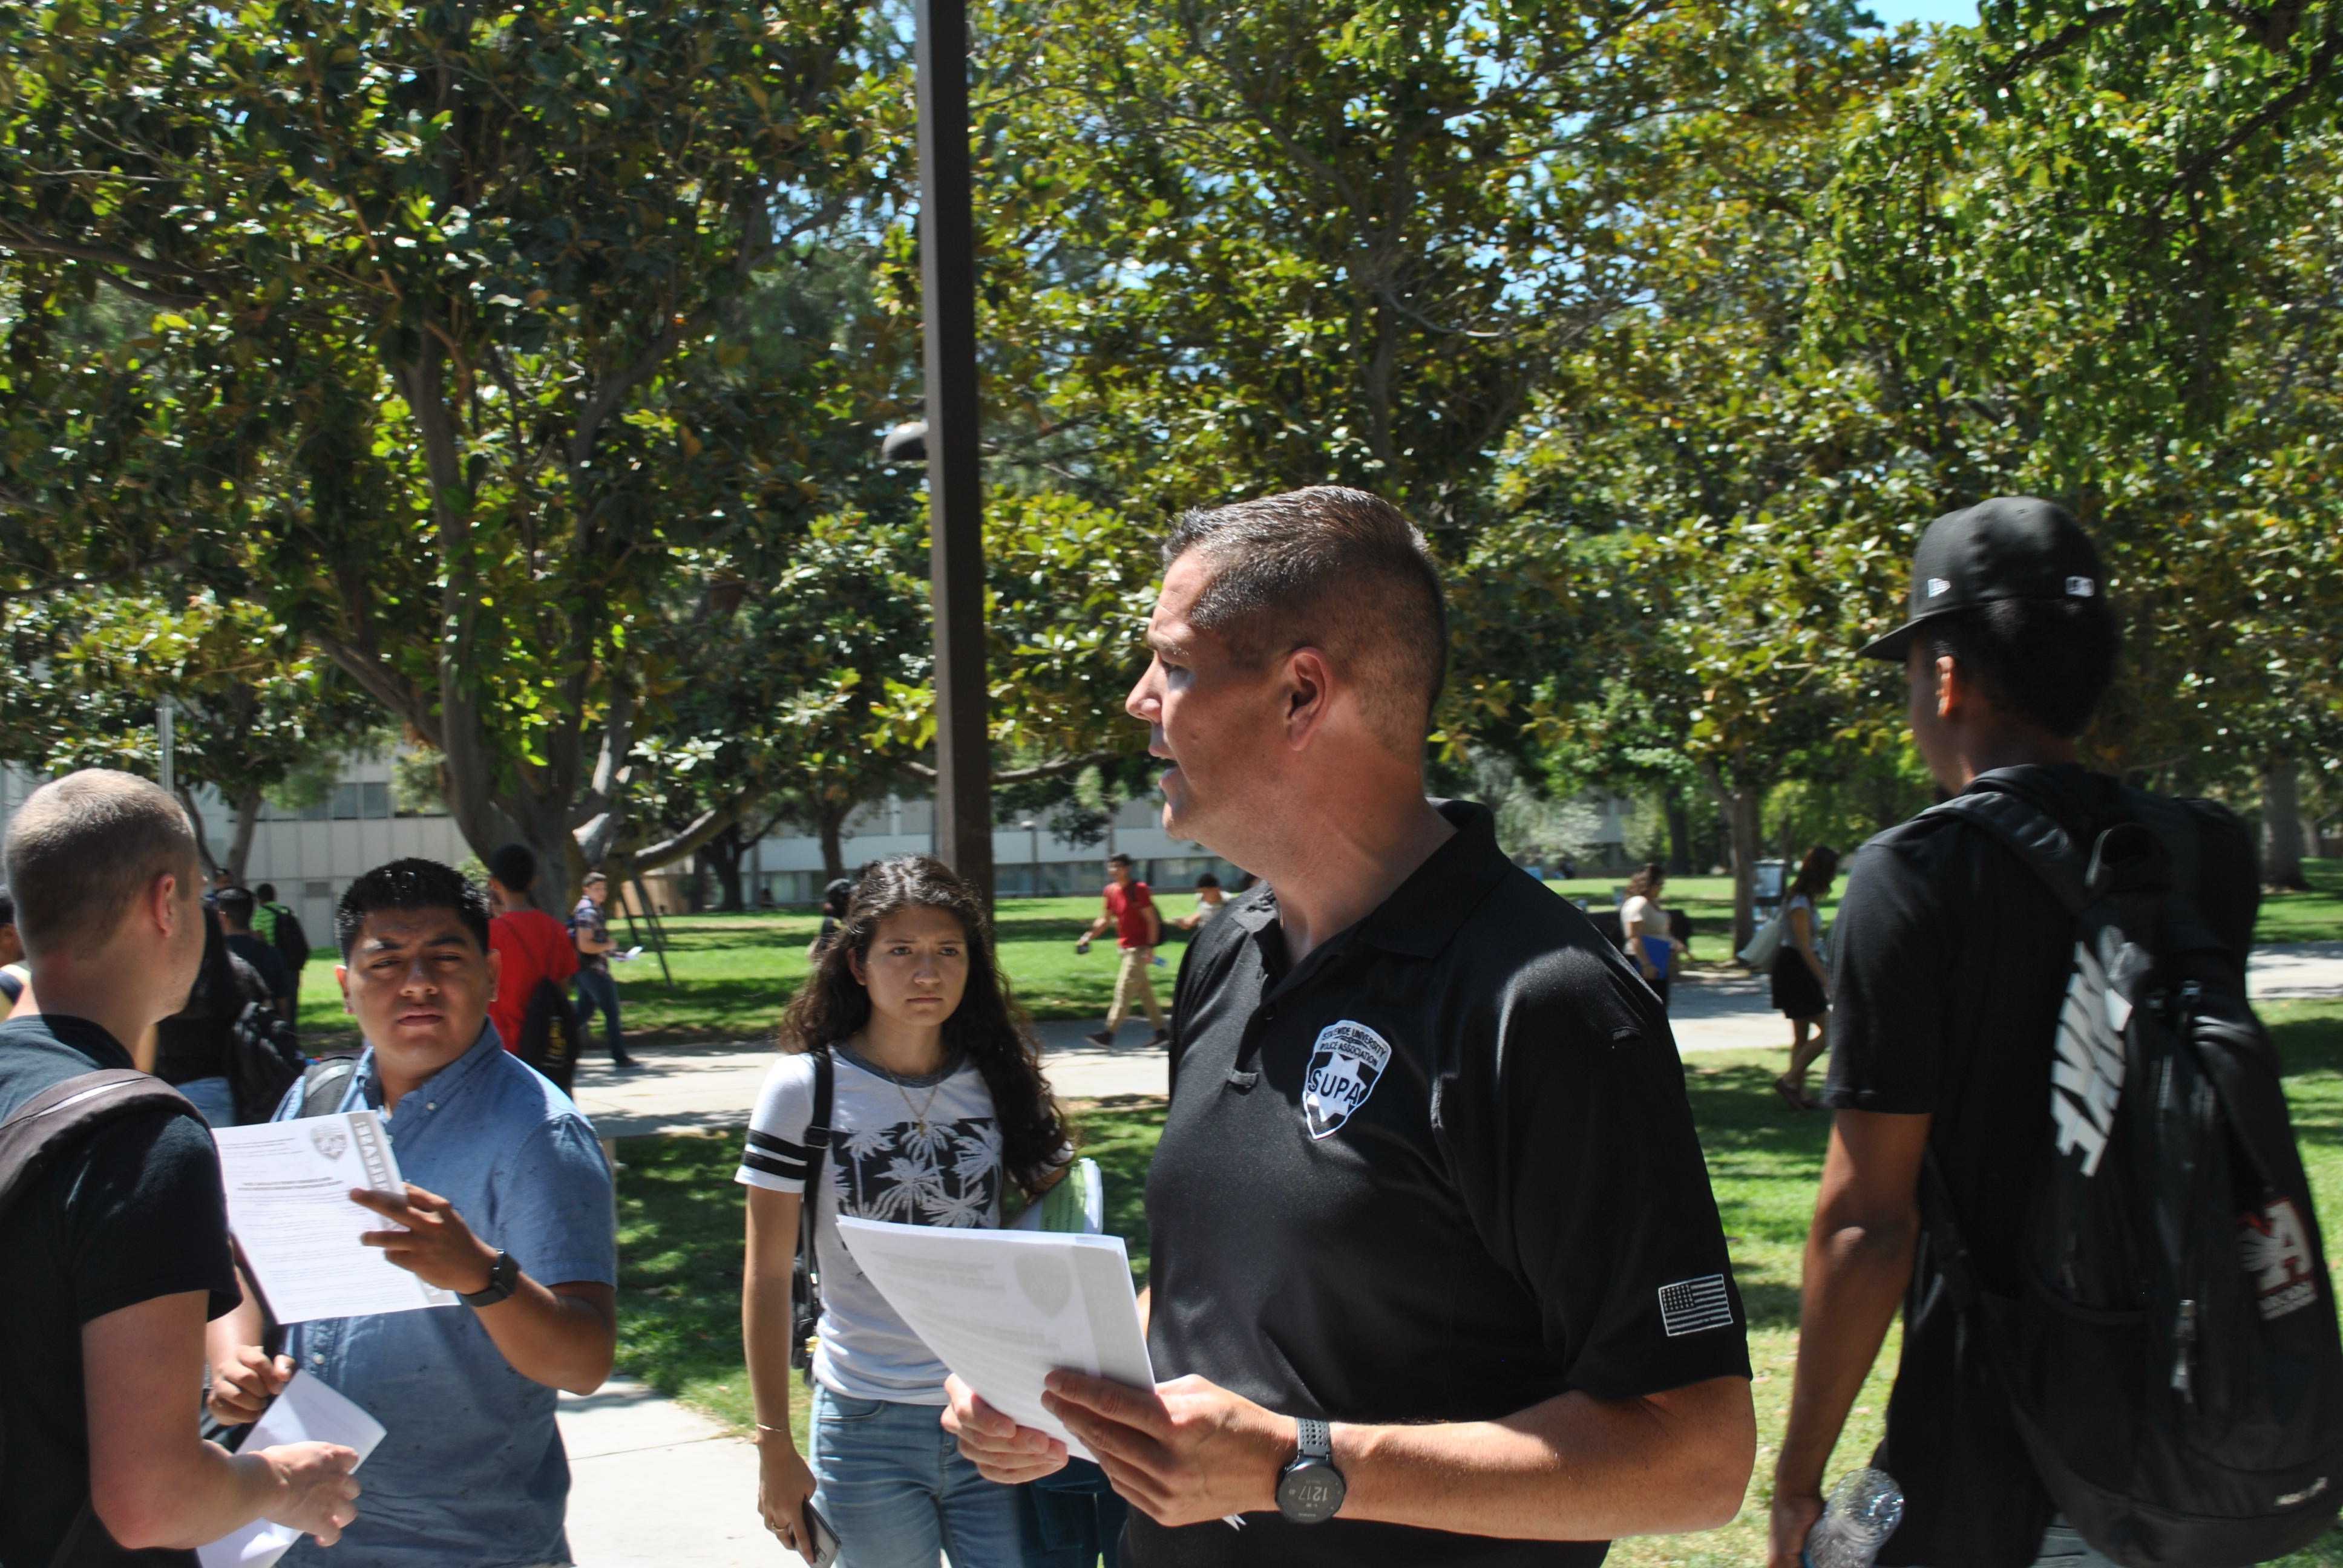 The President of the Statewide University Police Association (SUPA) Jeff Solomon hands out flyers and speaks to students about alleged parking citation quota. Photo credit: Blaise Scemama